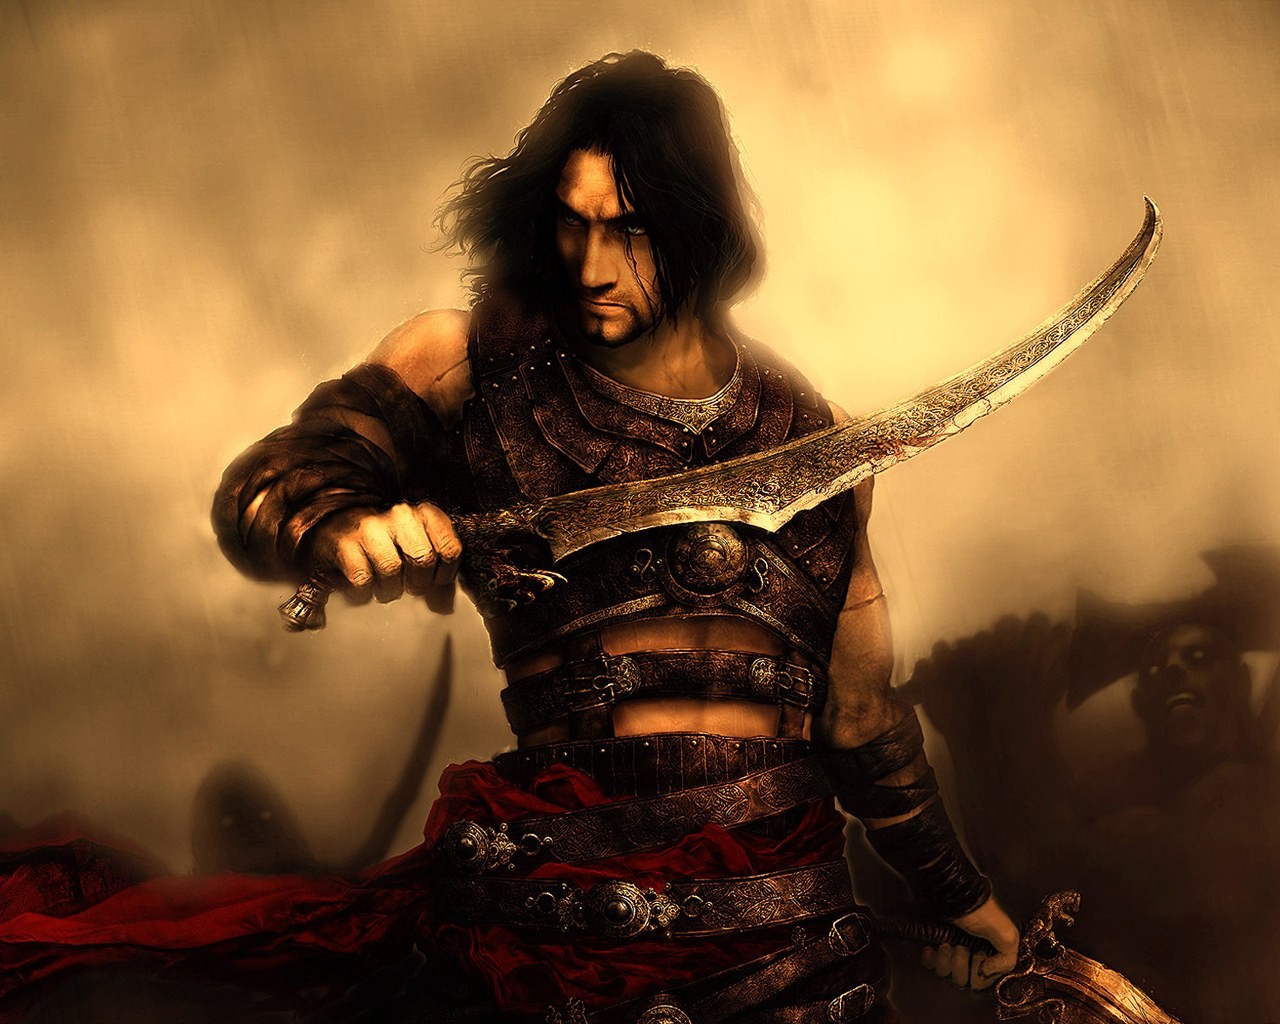 Prince of Persia full range of wallpapers #14 - 1280x1024